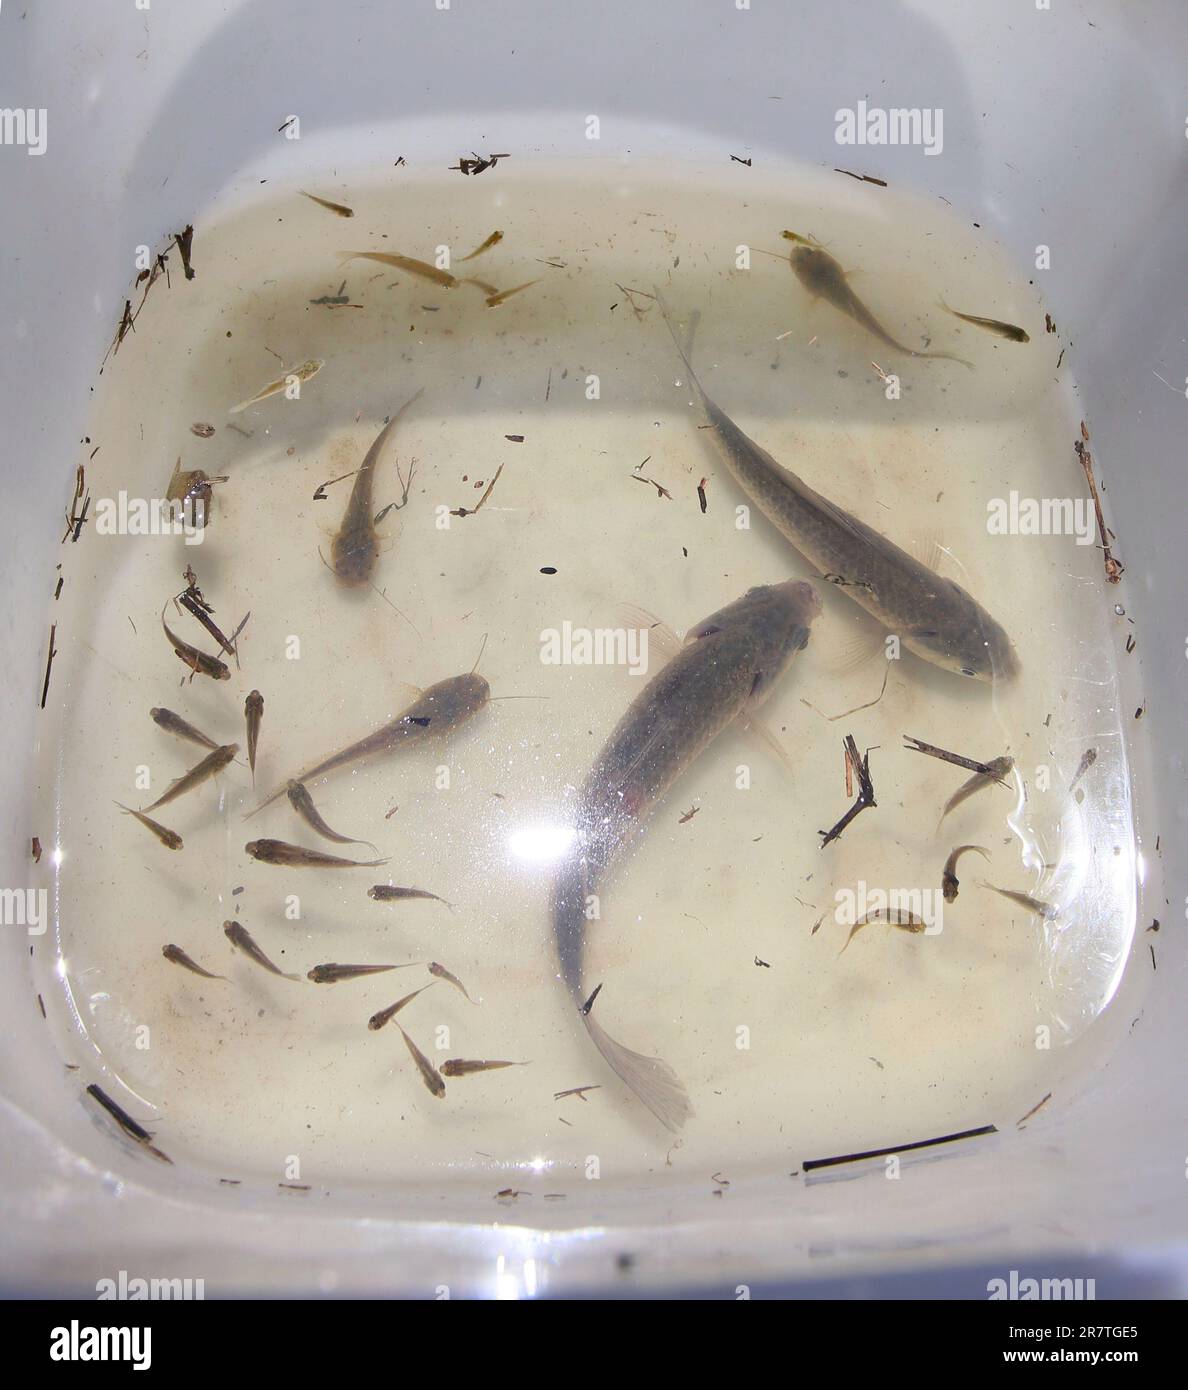 Fish caught in a net is shown in a water tank during the  Sakana-no-yurikago-suiden Mai ( the rice from cradle paddy of fishes)  Project in Yasu, Shiga Prefecture on June 17, 2023.